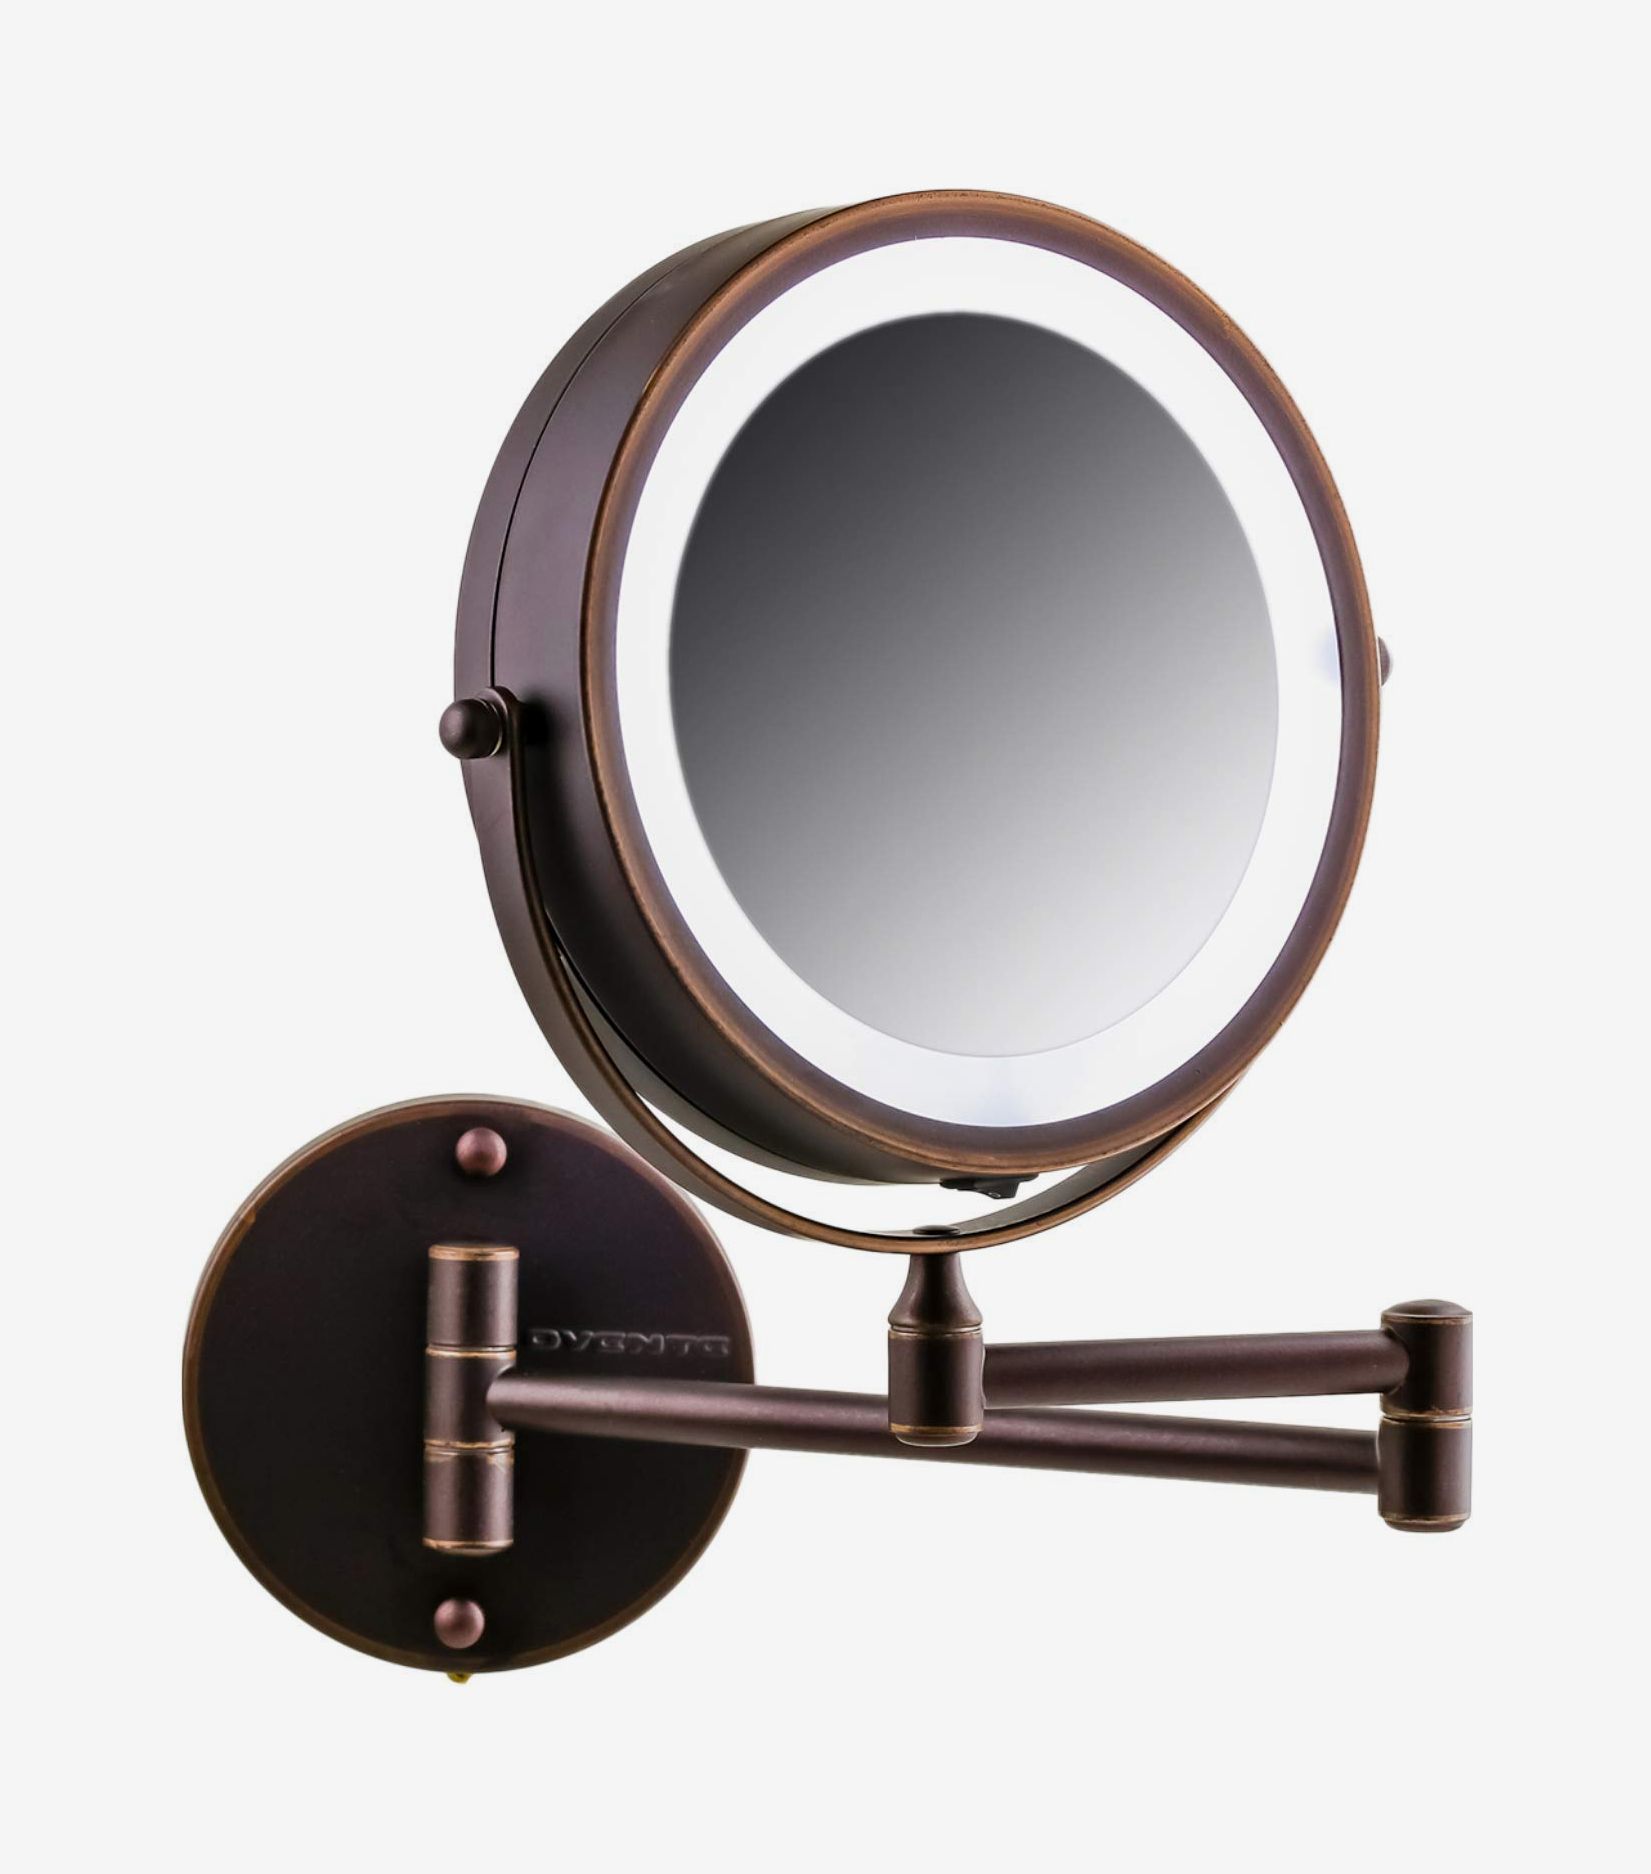 14 Best Lighted Makeup Mirrors 2021, Magnifying Makeup Mirror With Lights Wall Mounted